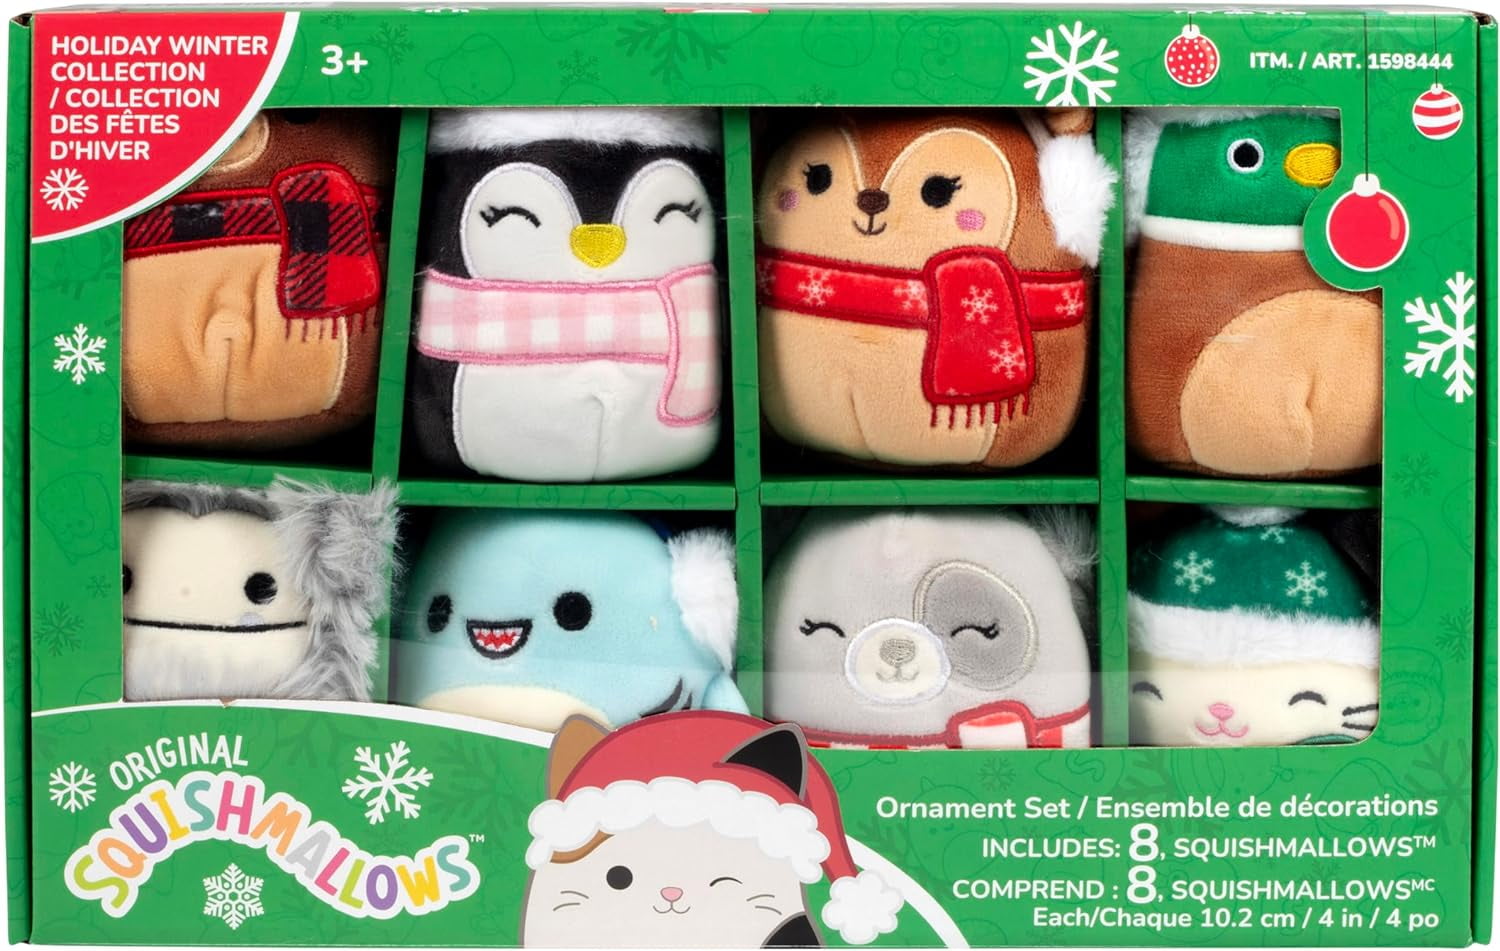  Squishville by The Original Squishmallows Holiday Calendar - 24  Exclusive 2” Festive Squishmallows - Seasonal Toys for Kids and  Preschoolers - Ages 3+ : Toys & Games